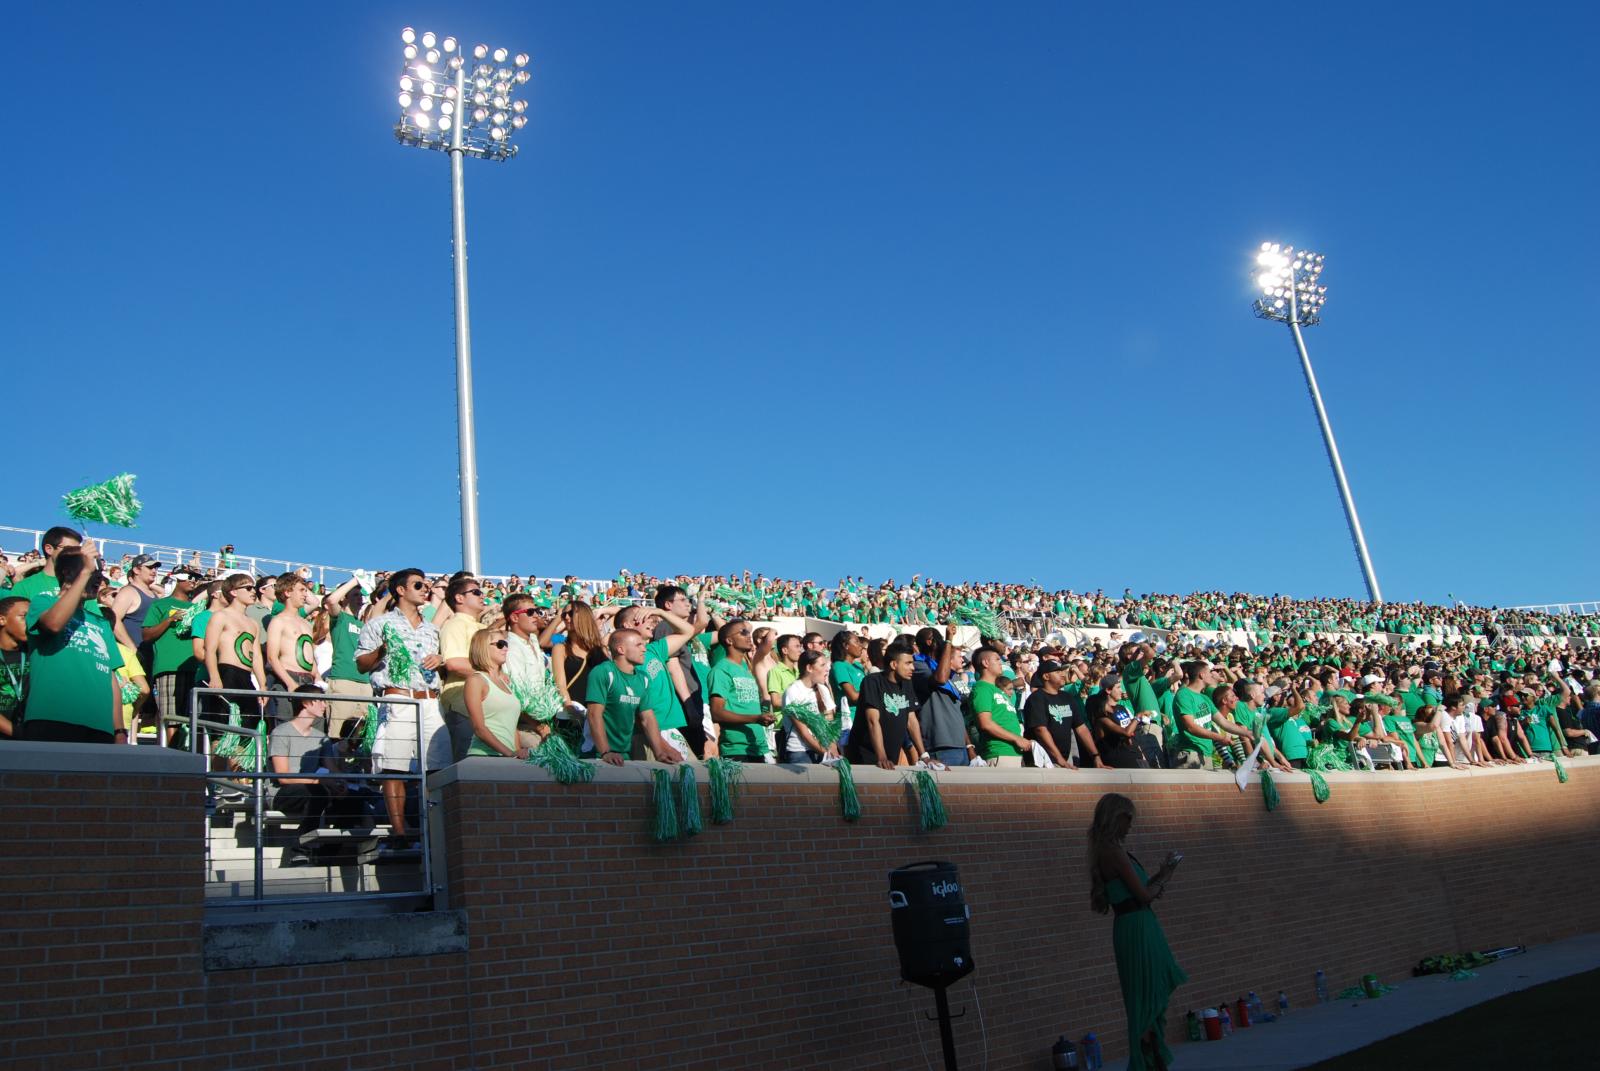 UNT Student side of Apogee